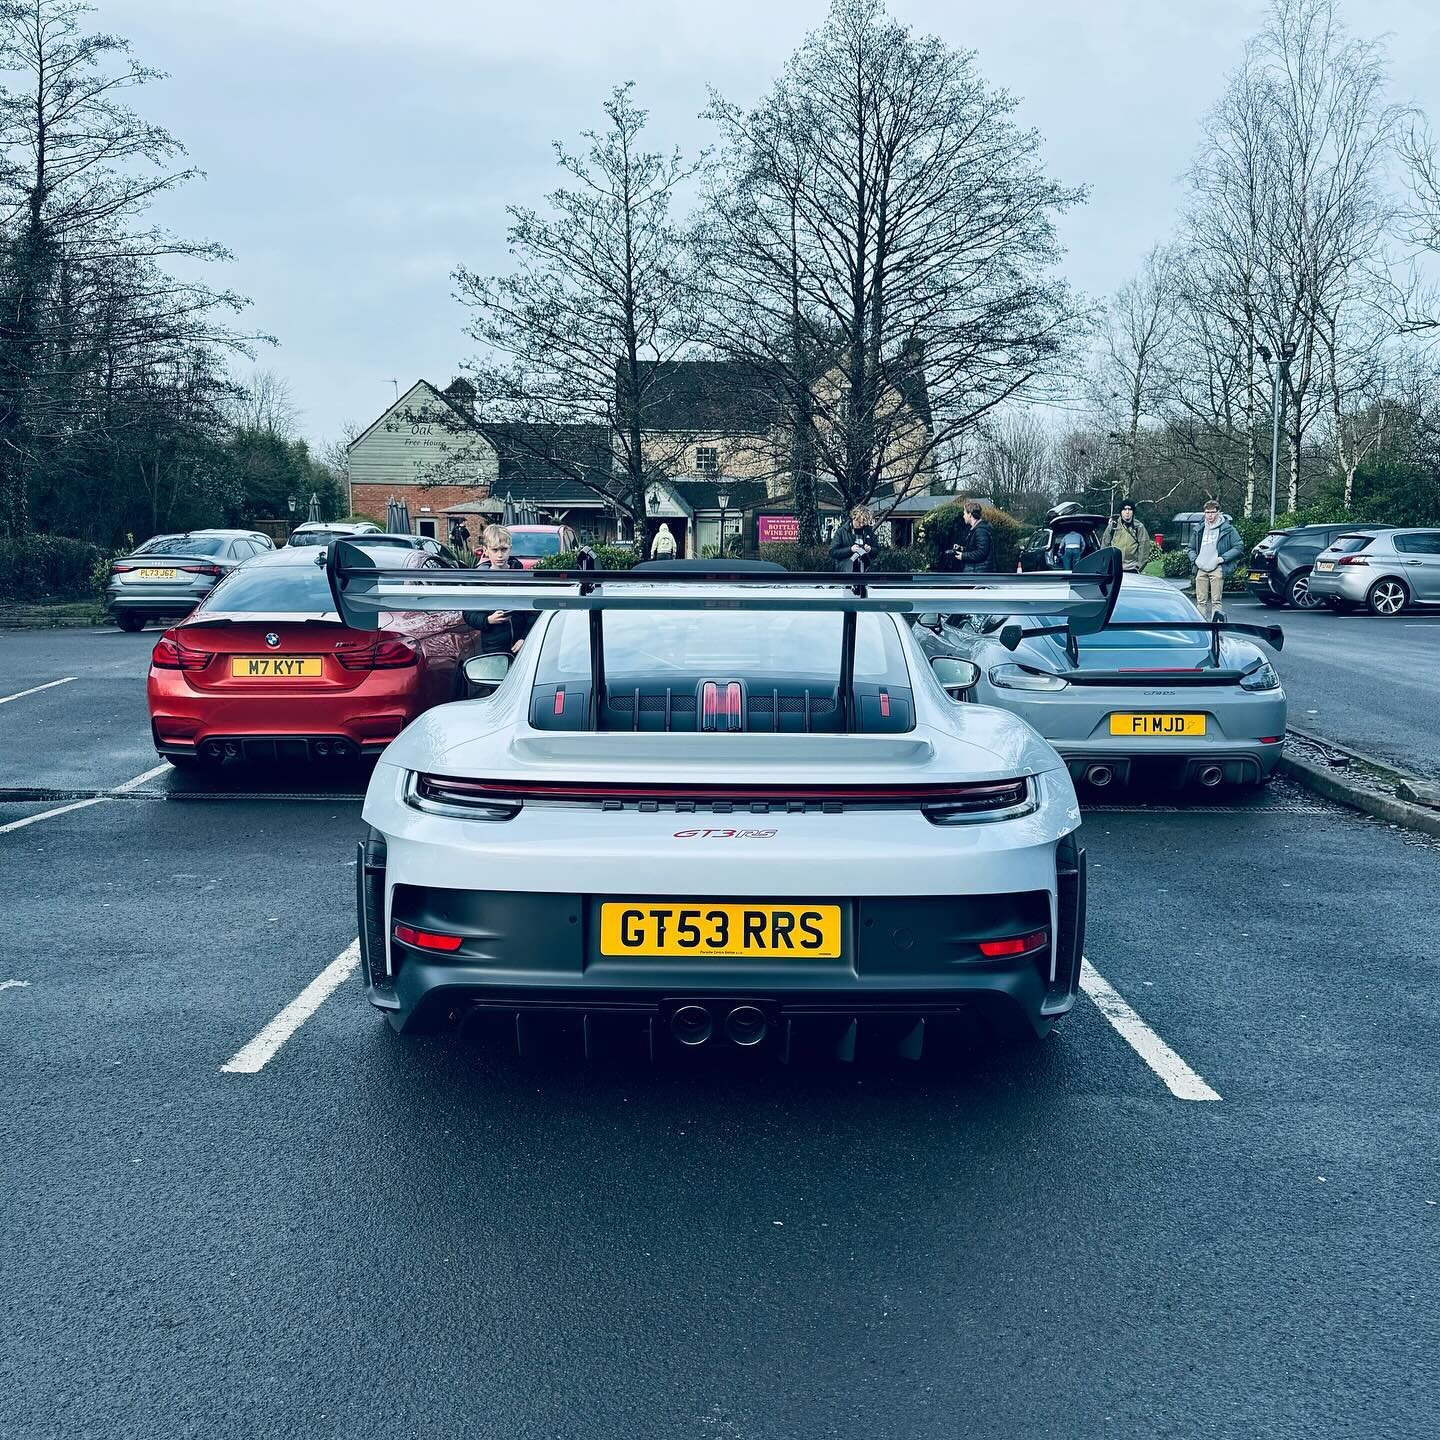 A big thanks to @supercars_of_lancashire 
First time attending, great turnout, some rare beasts and most importantly a friendly and chilled bunch. Surprised at the number of brands represented, including Ferrari, Lamborghini, McLaren, Porsche, TVR, L